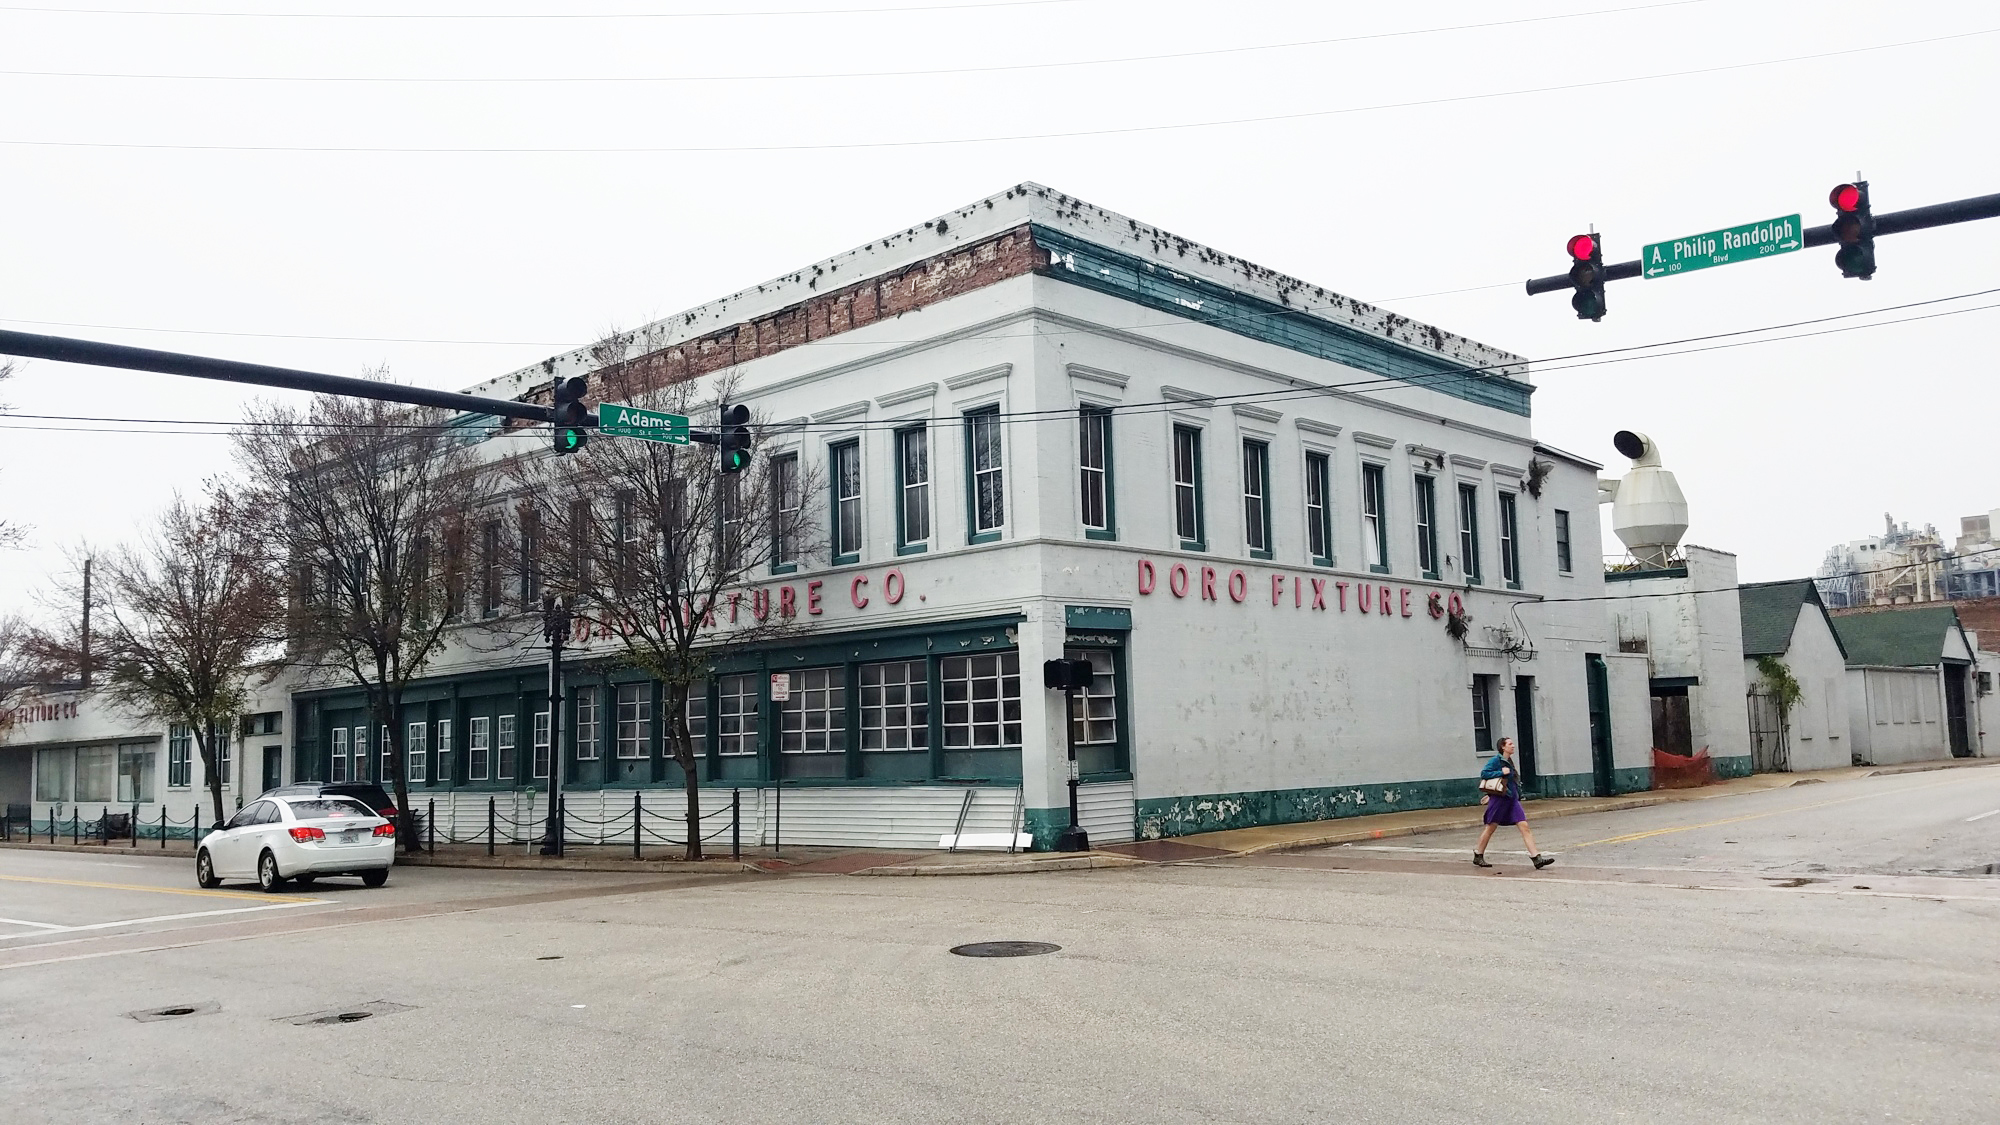 The Doro Fixture Co. building will be torn down to make way for the apartment development.